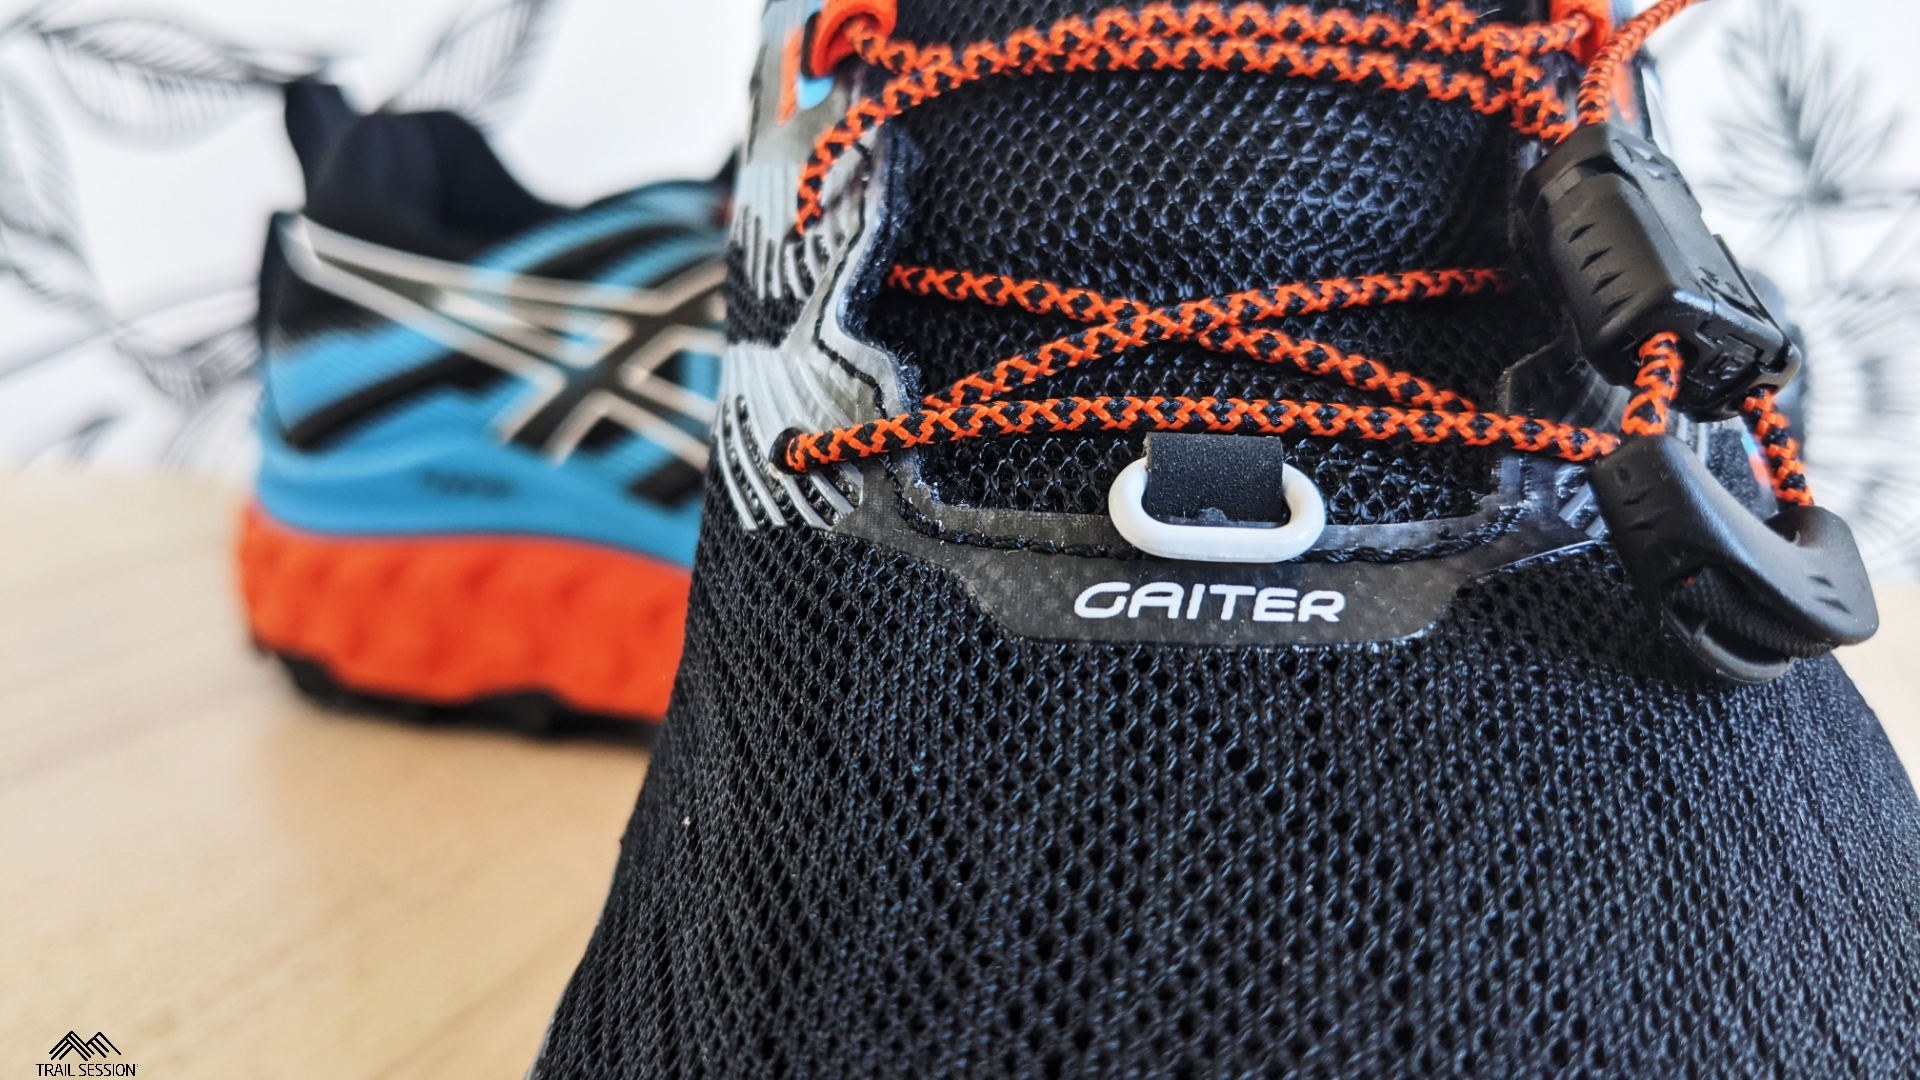 Asics Trabuco : lacets Quicklace